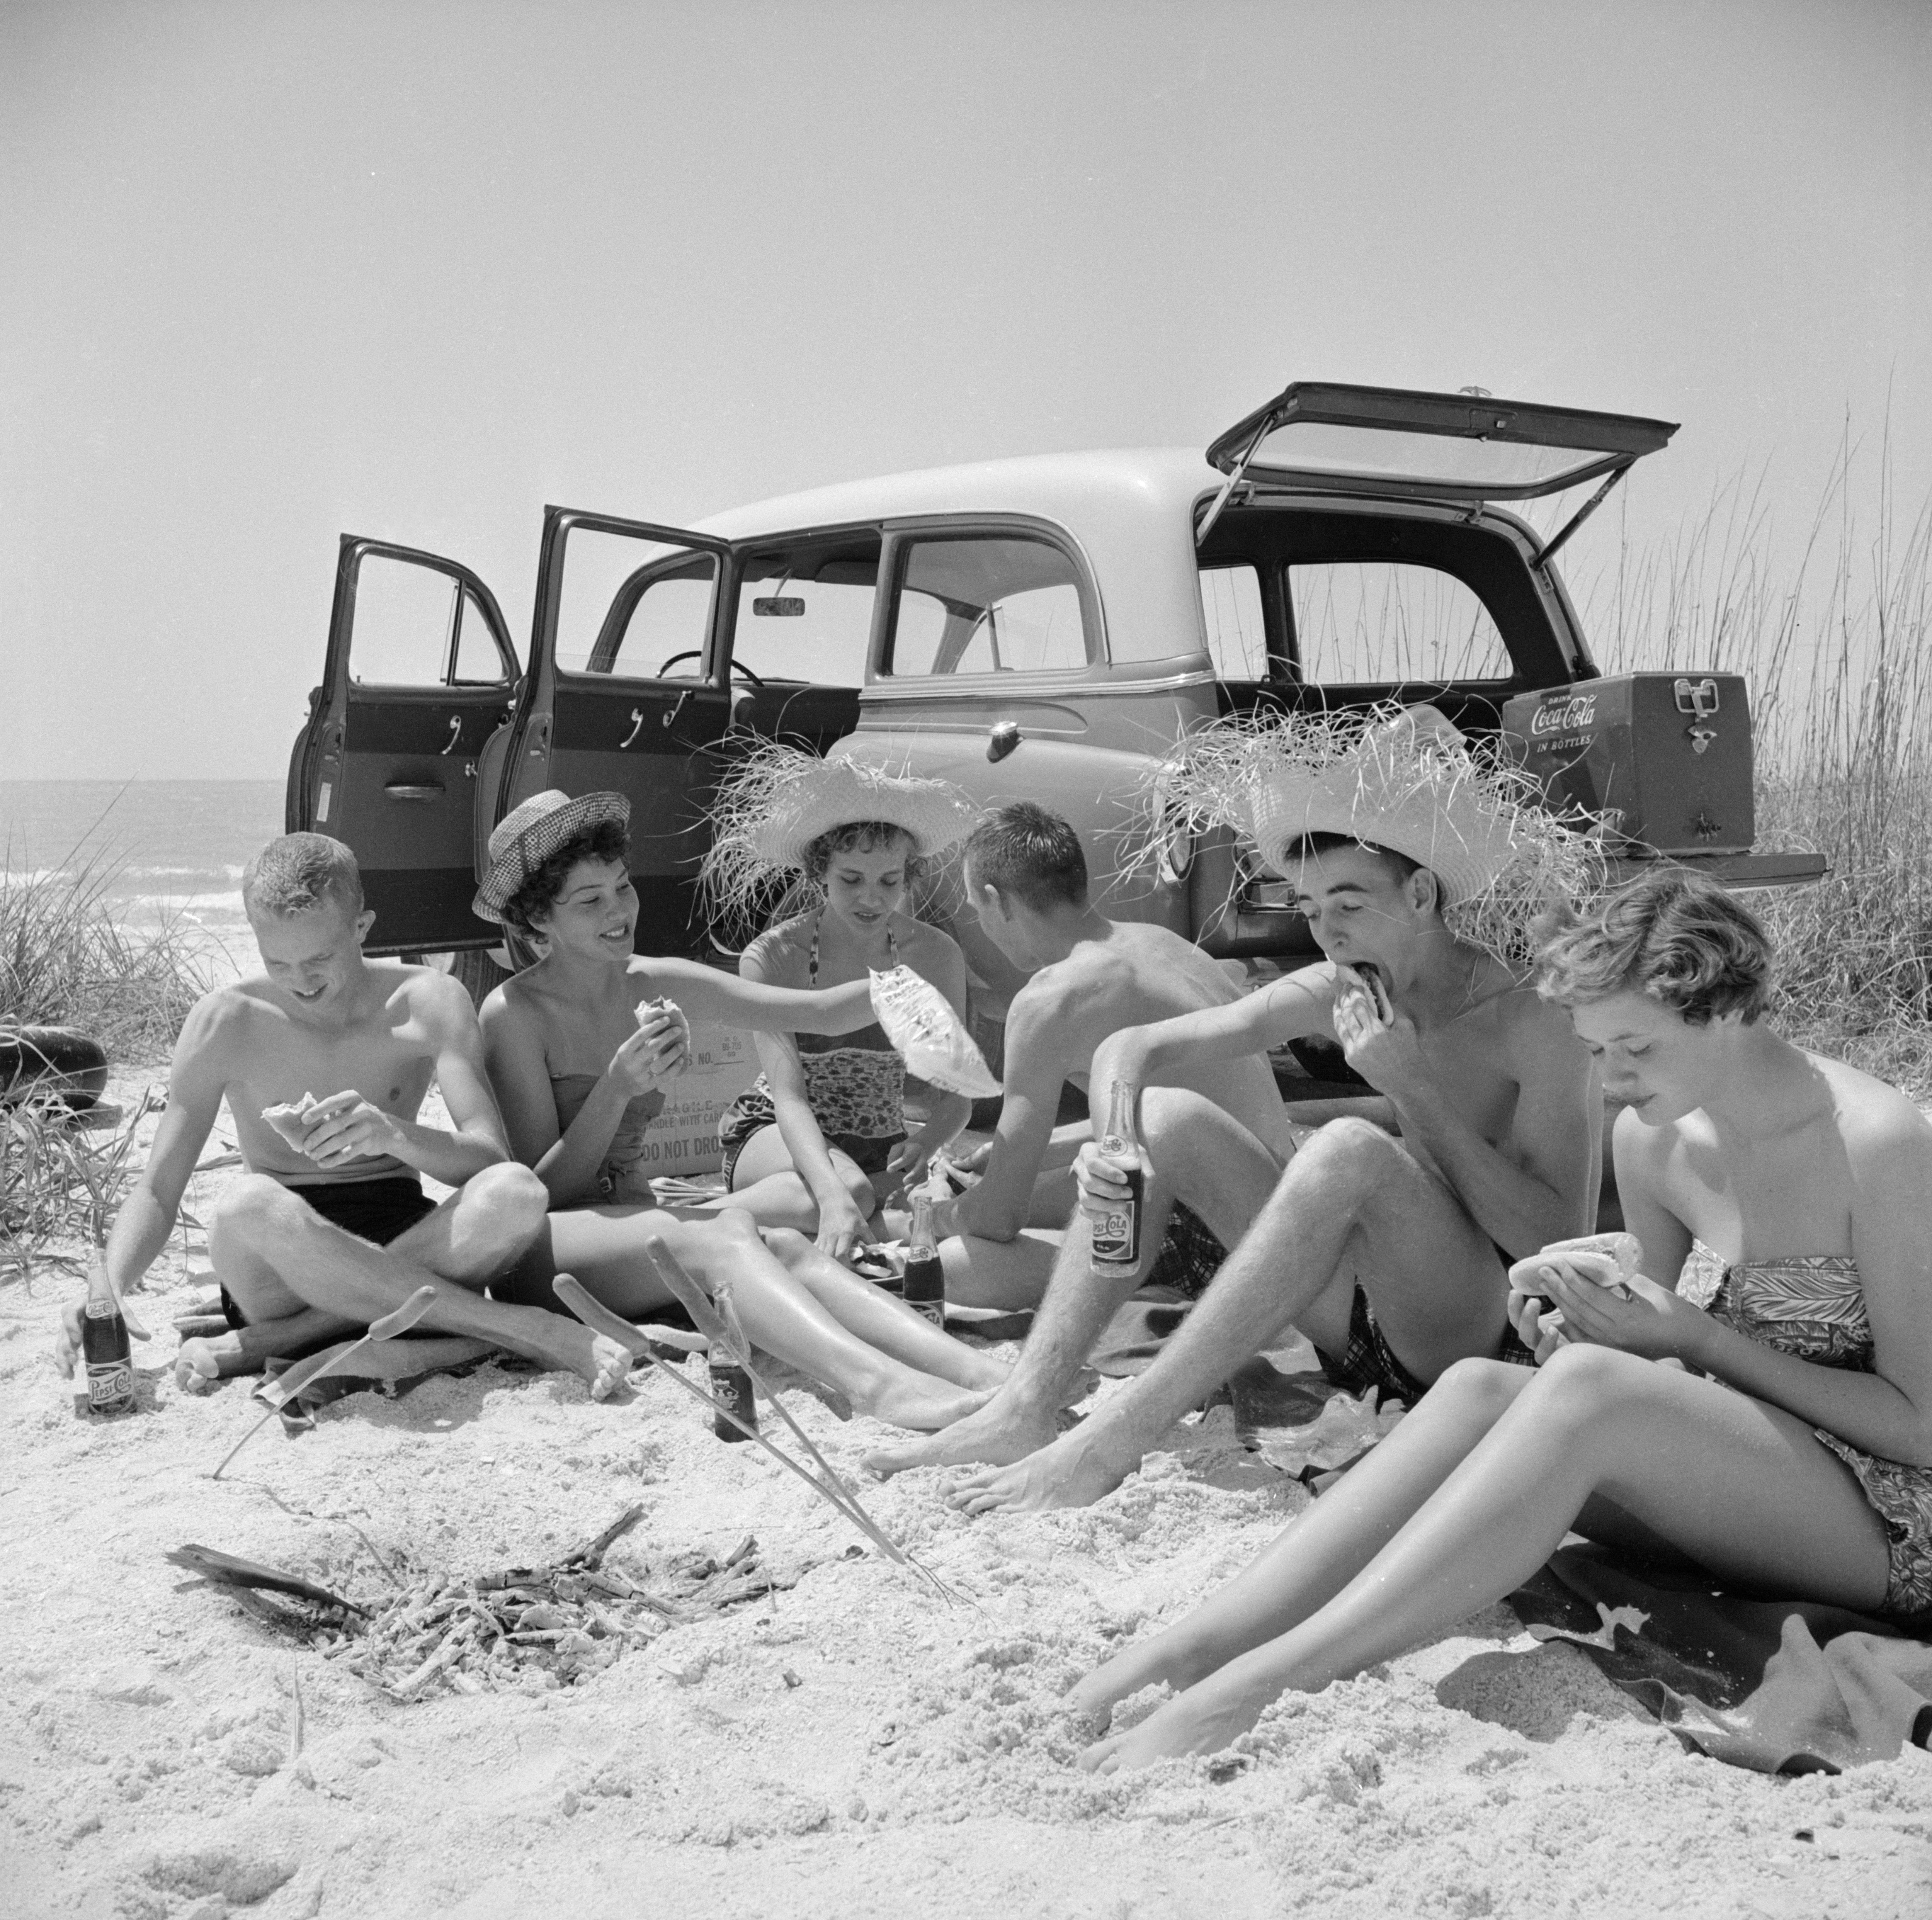 Slim Aarons Black and White Photograph - Spring Break (Estate Stamped Limited Edition) 20x24